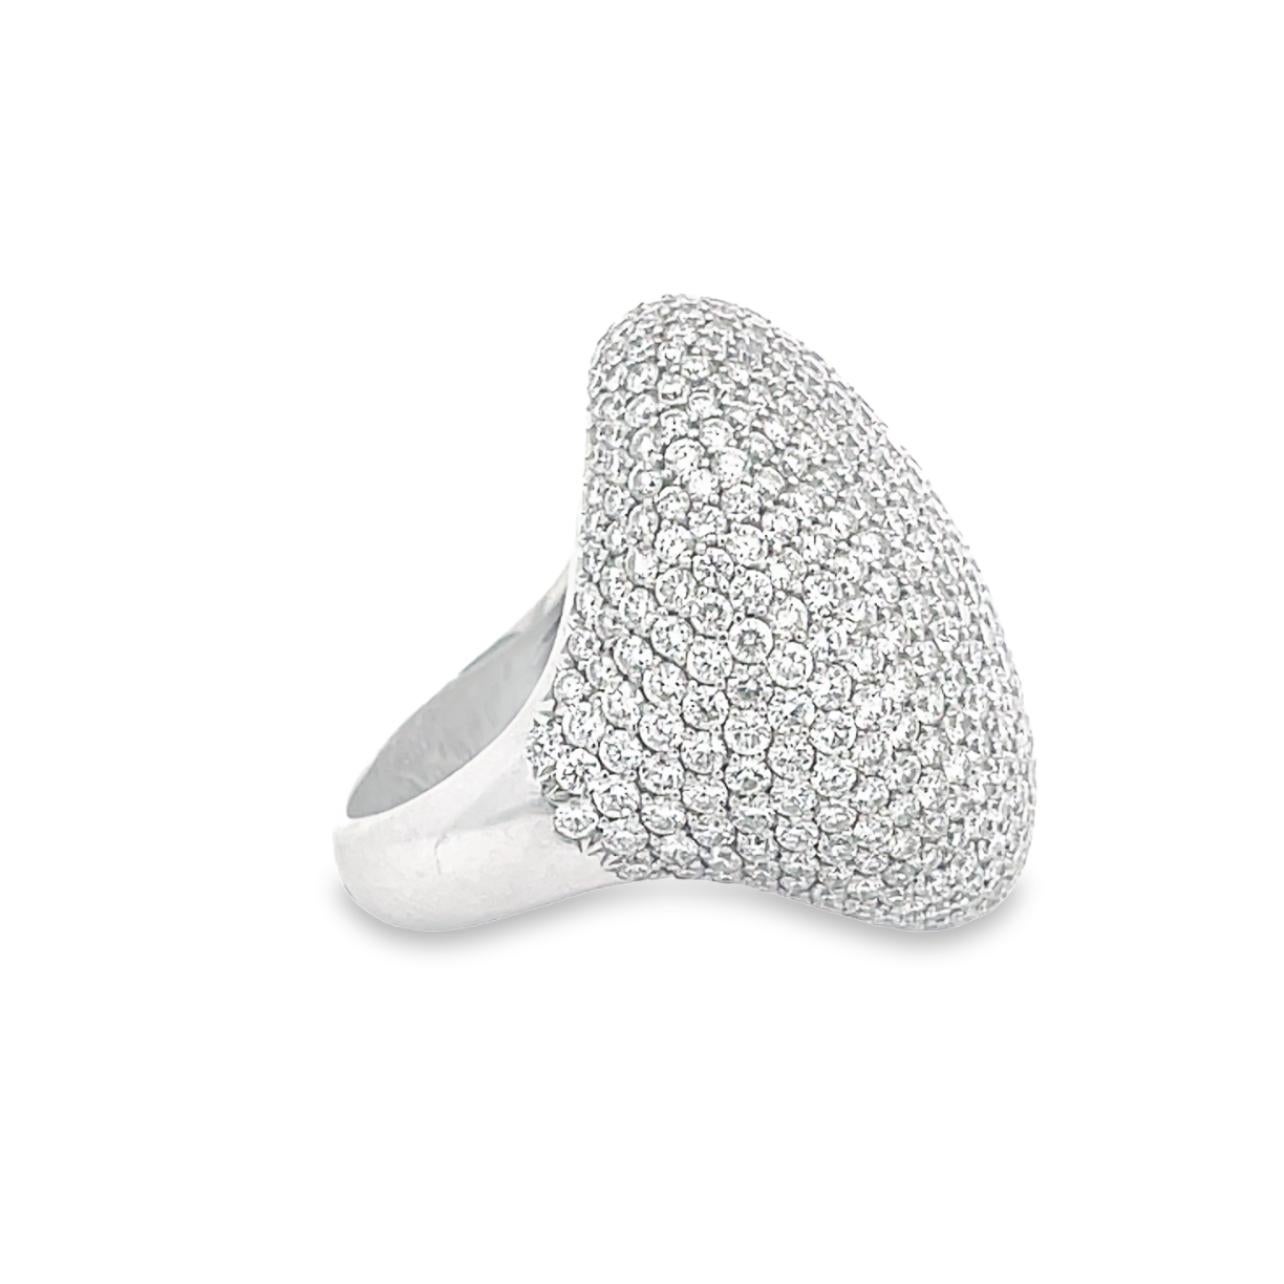 11 Carat Diamond Dome Cocktail Ring In Excellent Condition For Sale In Vail, CO